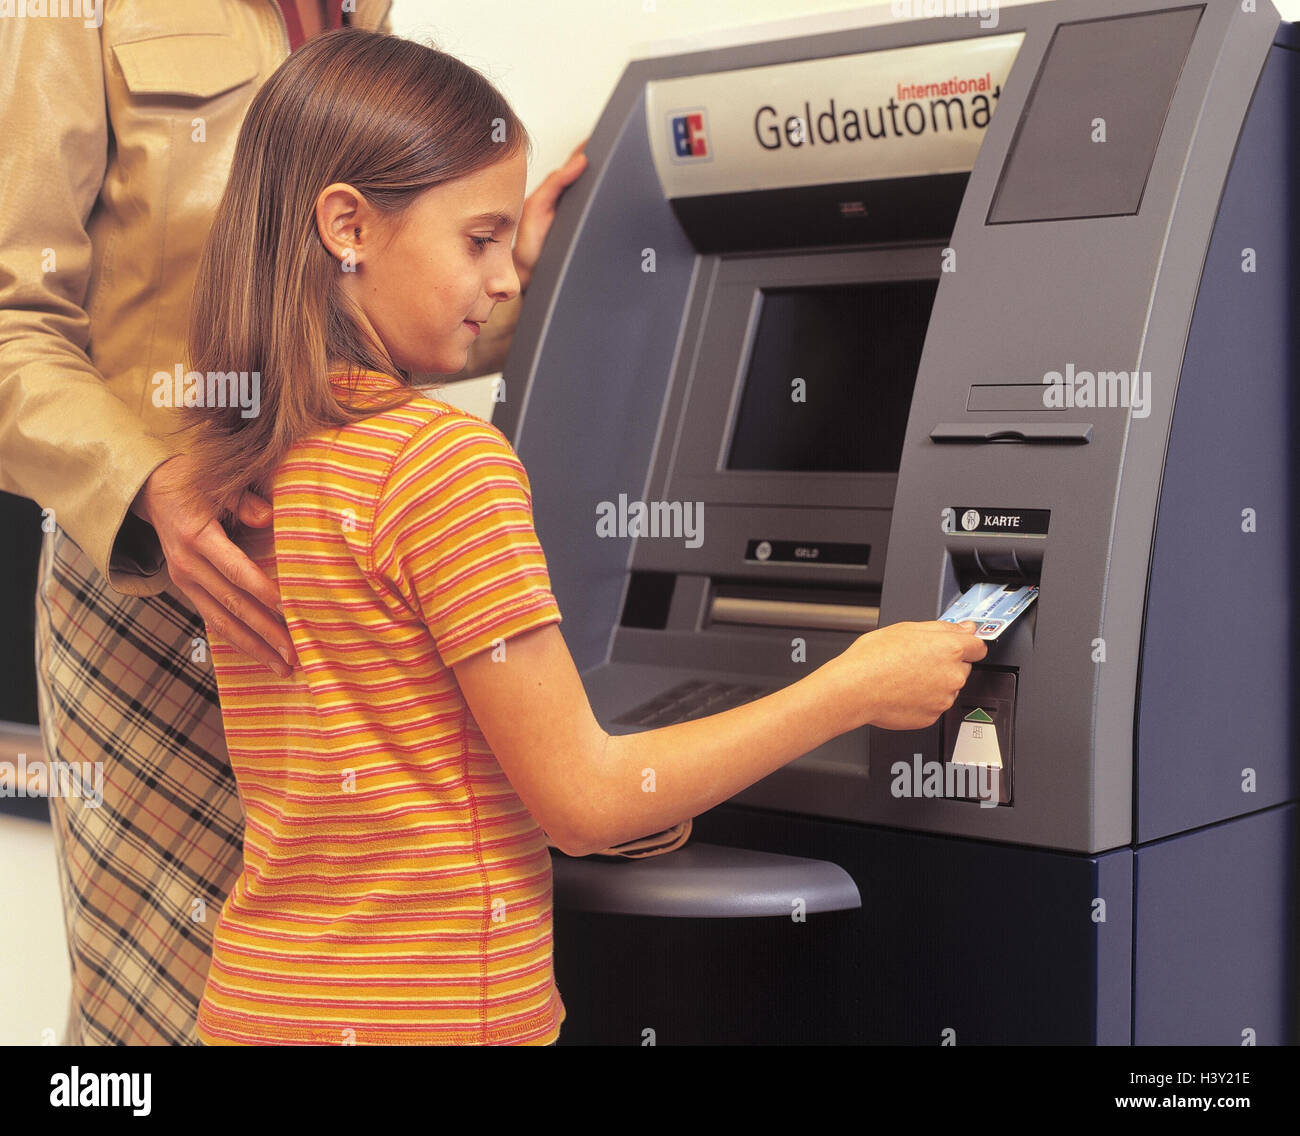 Bank, bancomat, nut, child, EC-card, would break in, woman, girl, automatic cash dispenser, identity card, check card, credit card, finances, money, cash, take off, icon, easily, Stock Photo